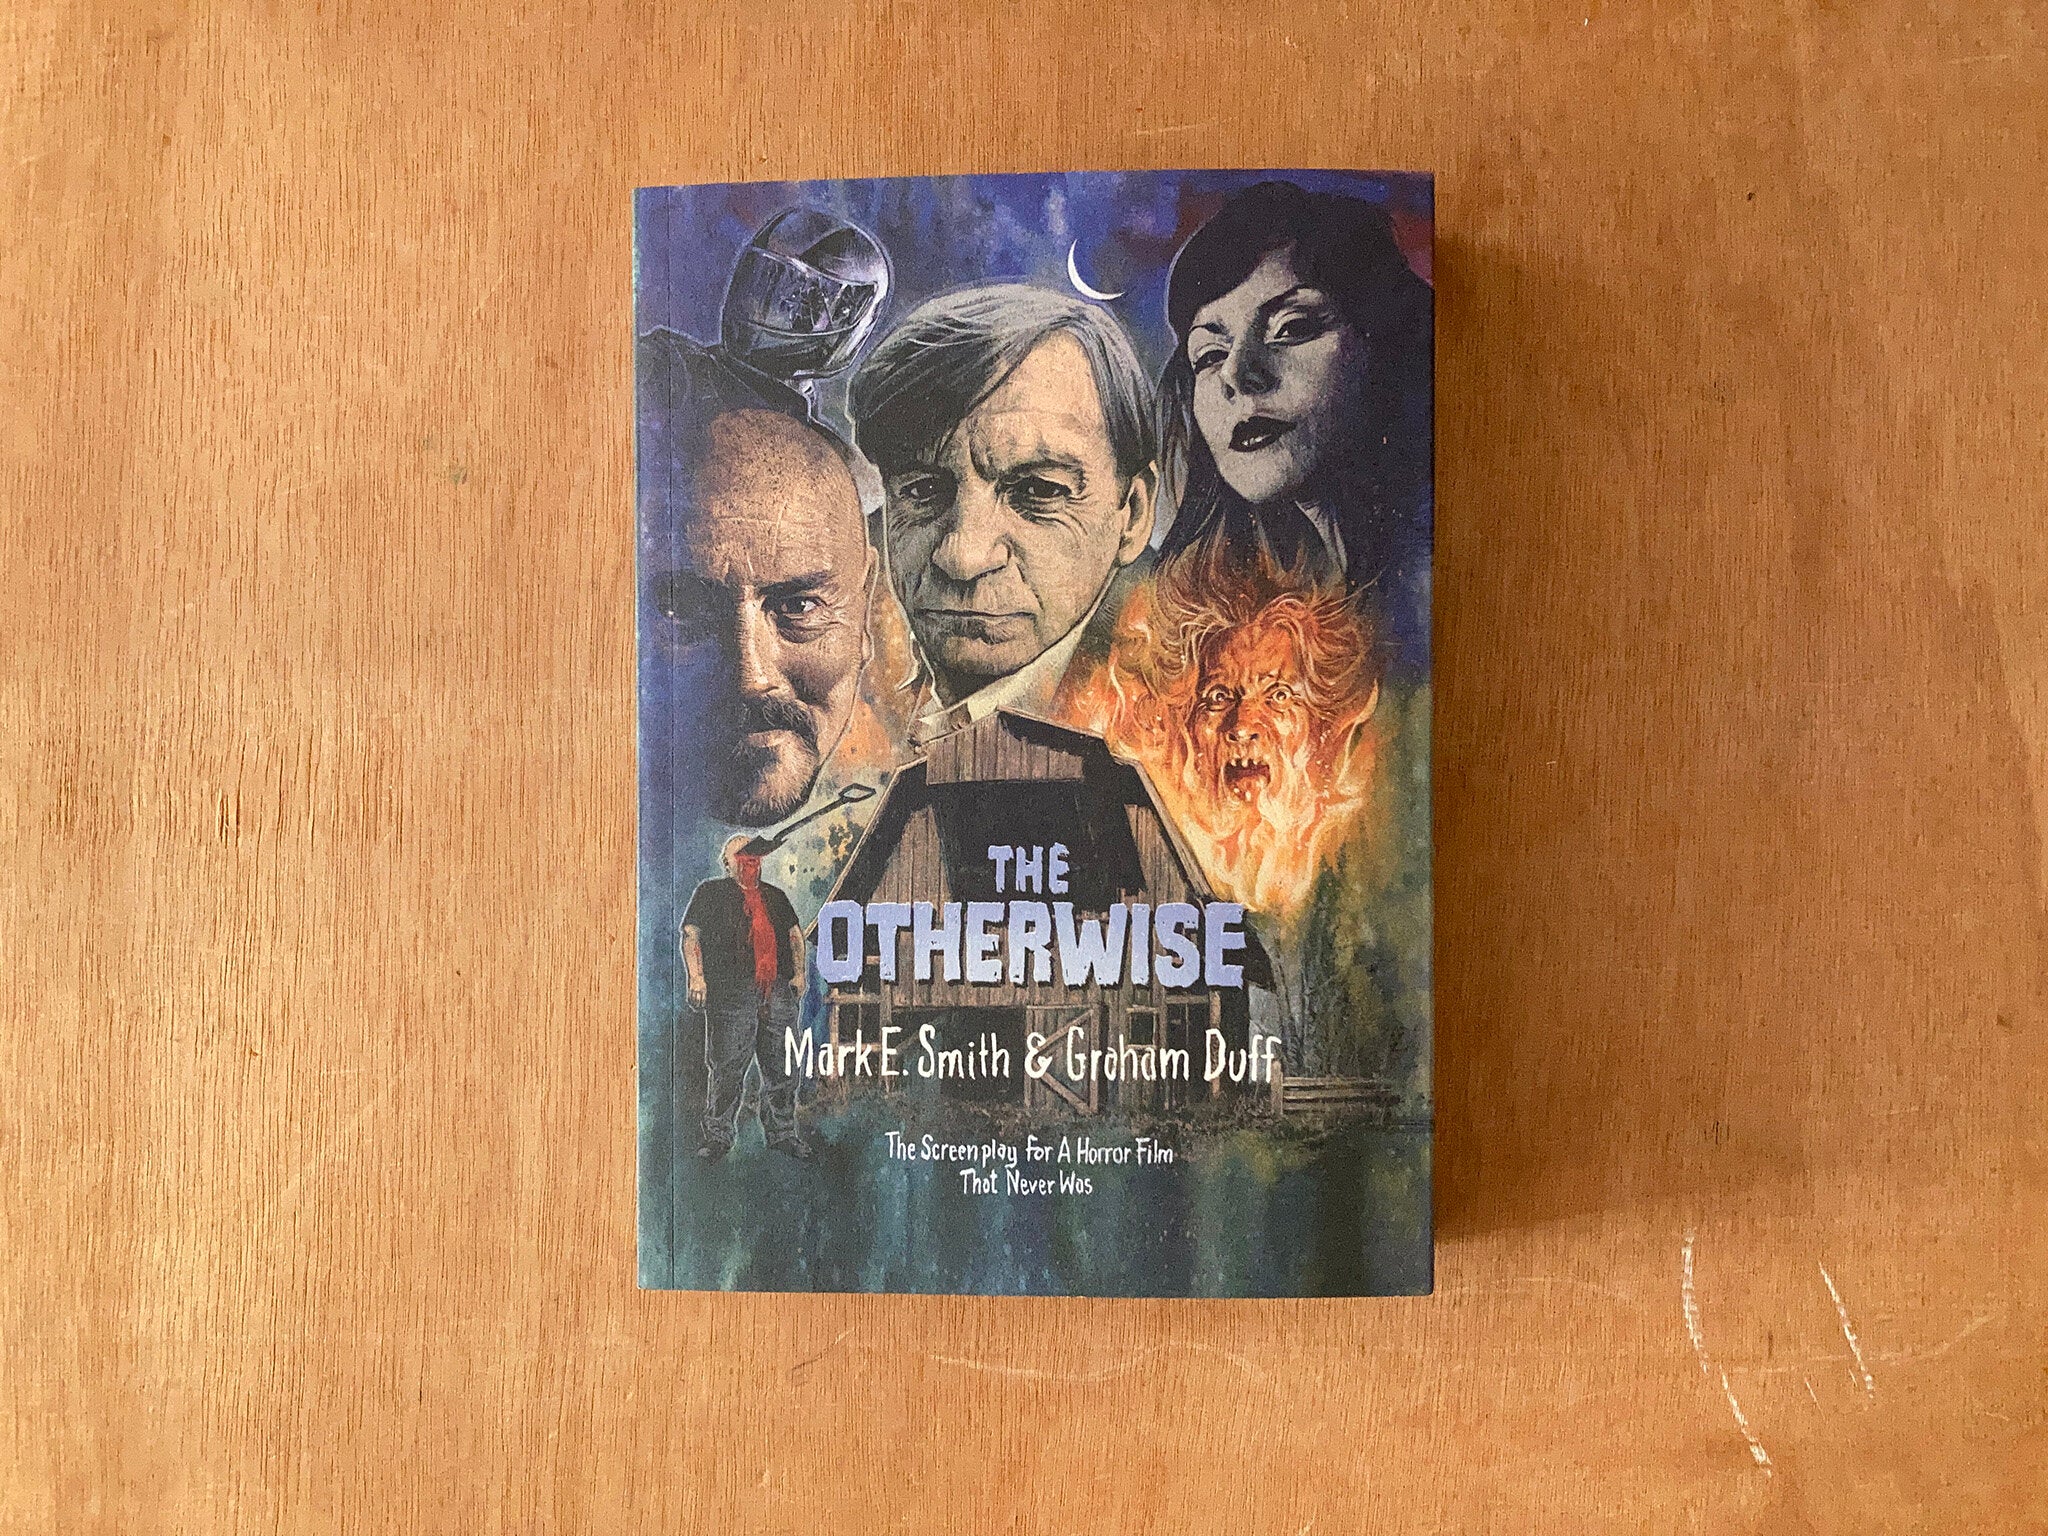 THE OTHERWISE by Mark E. Smith and Graham Duff